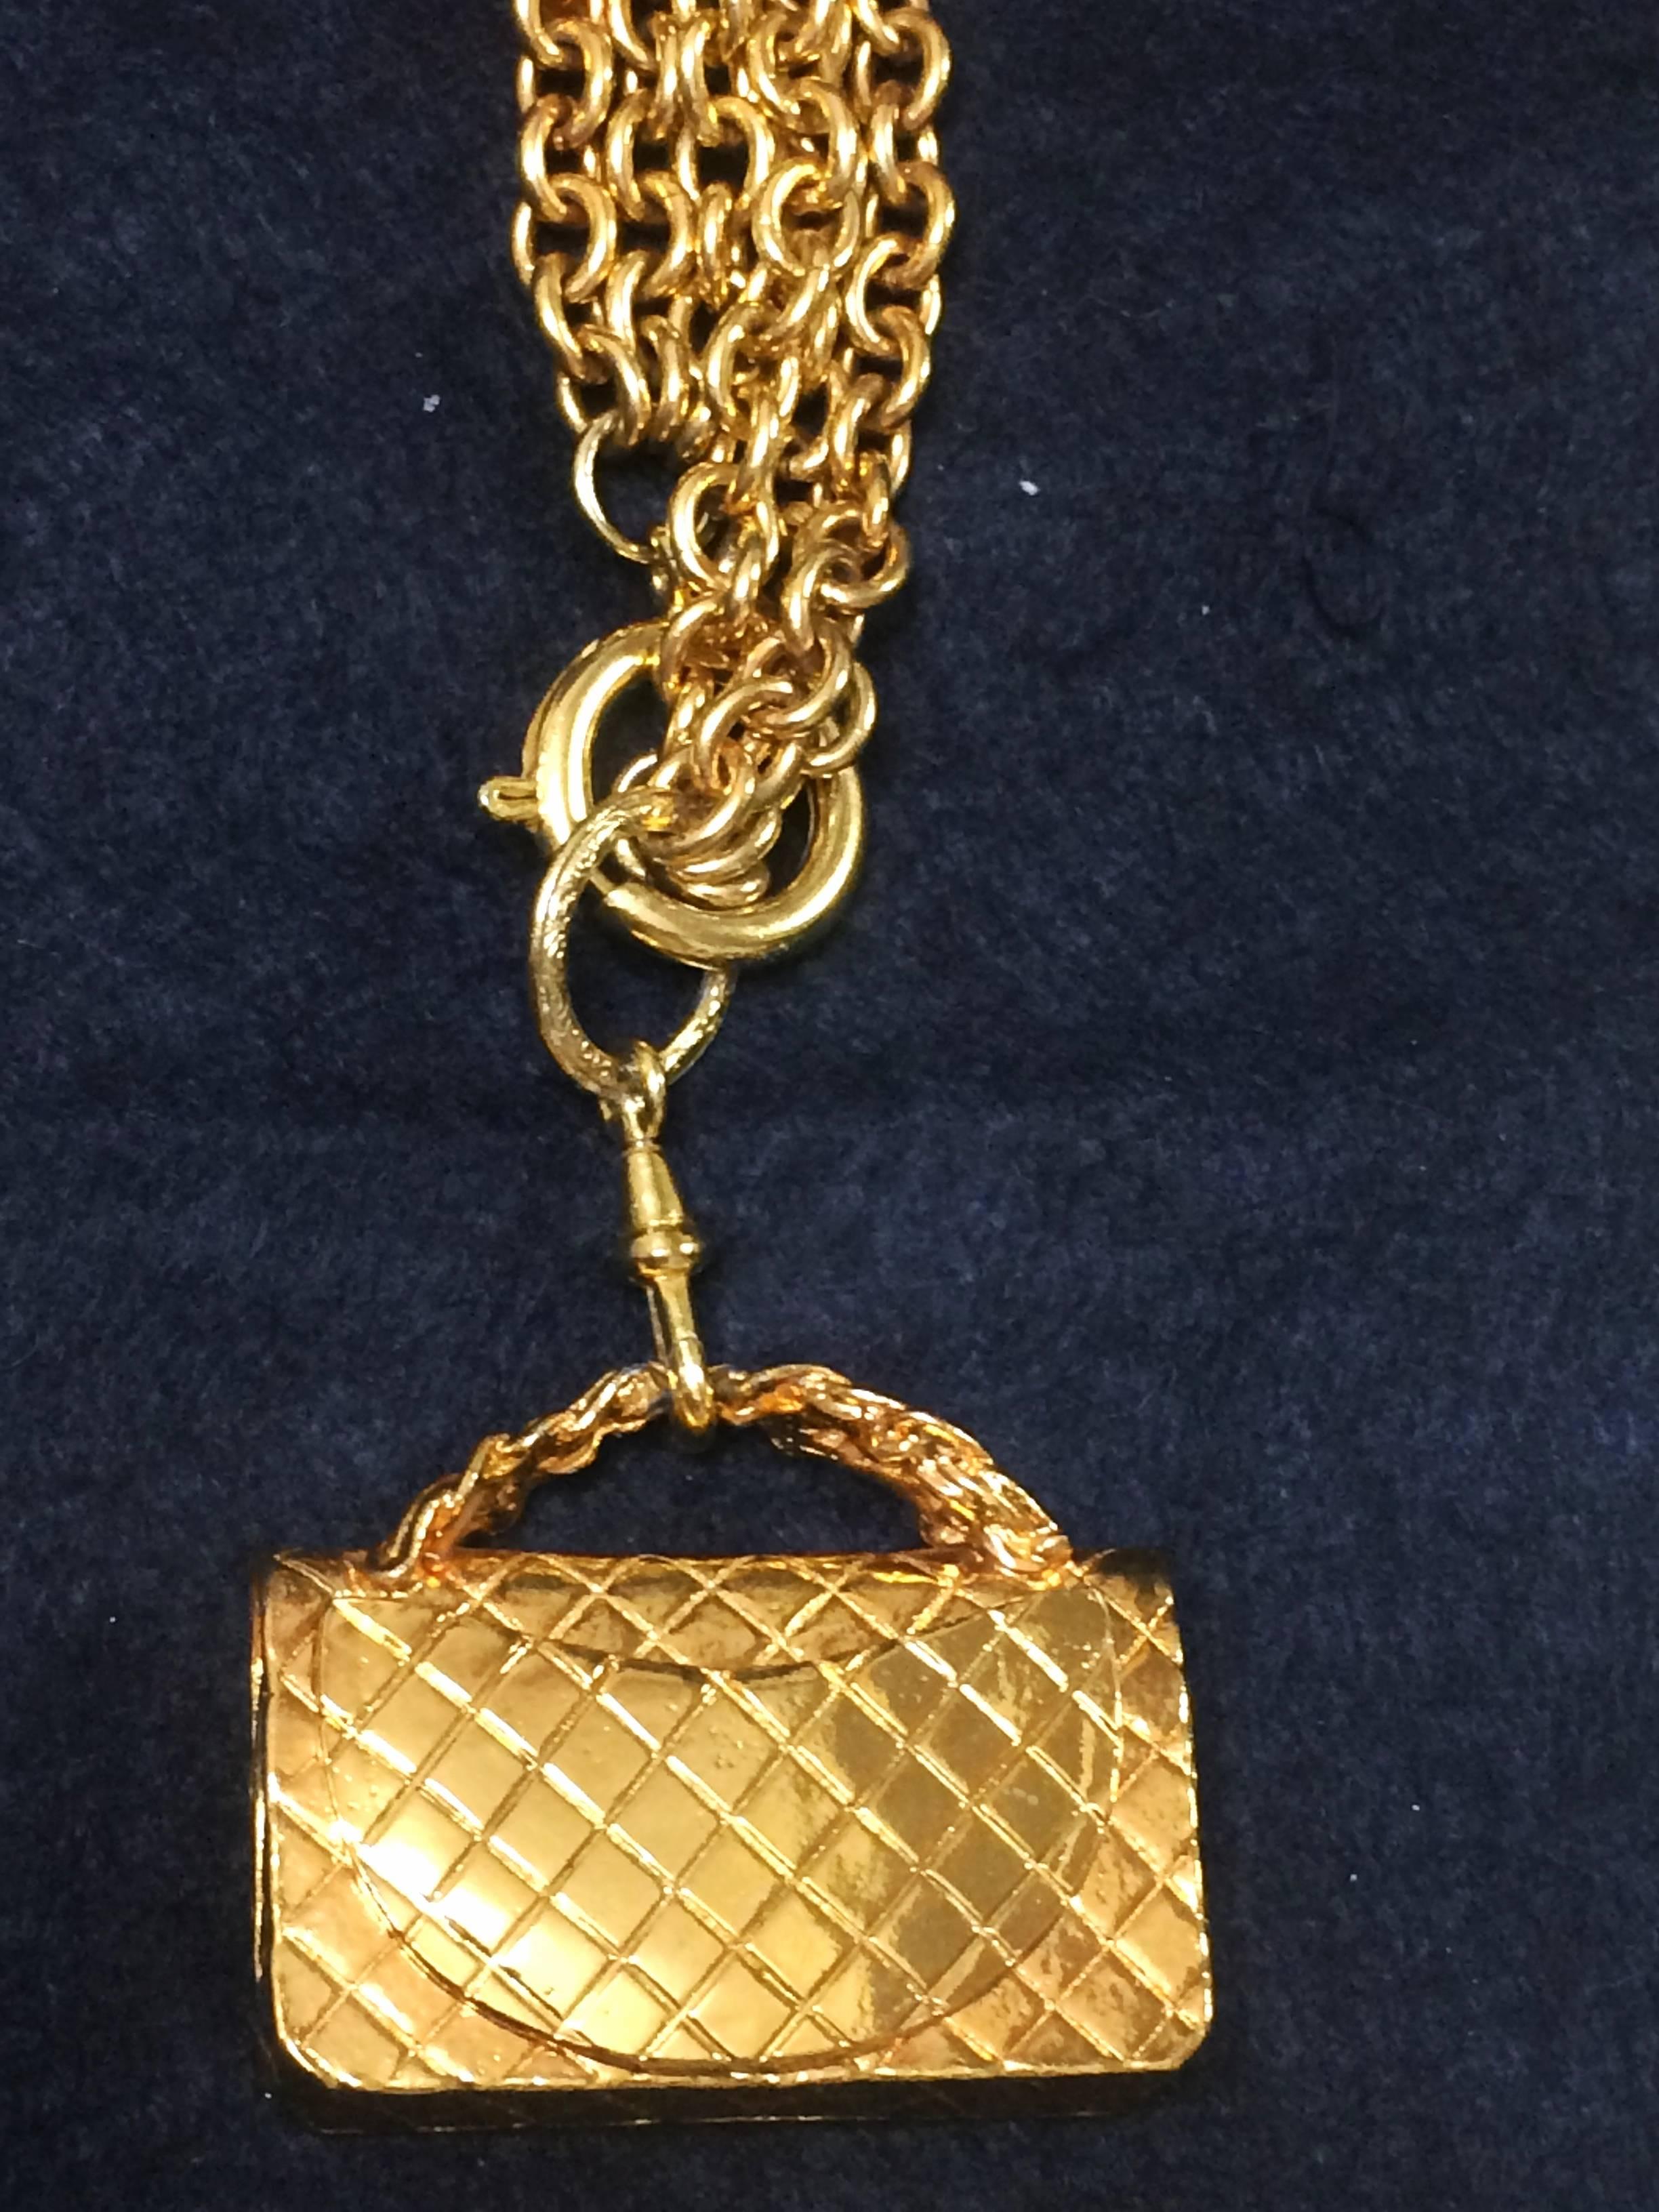 Vintage CHANEL golden double chain long necklace with classic 2.55 bag charm. 1